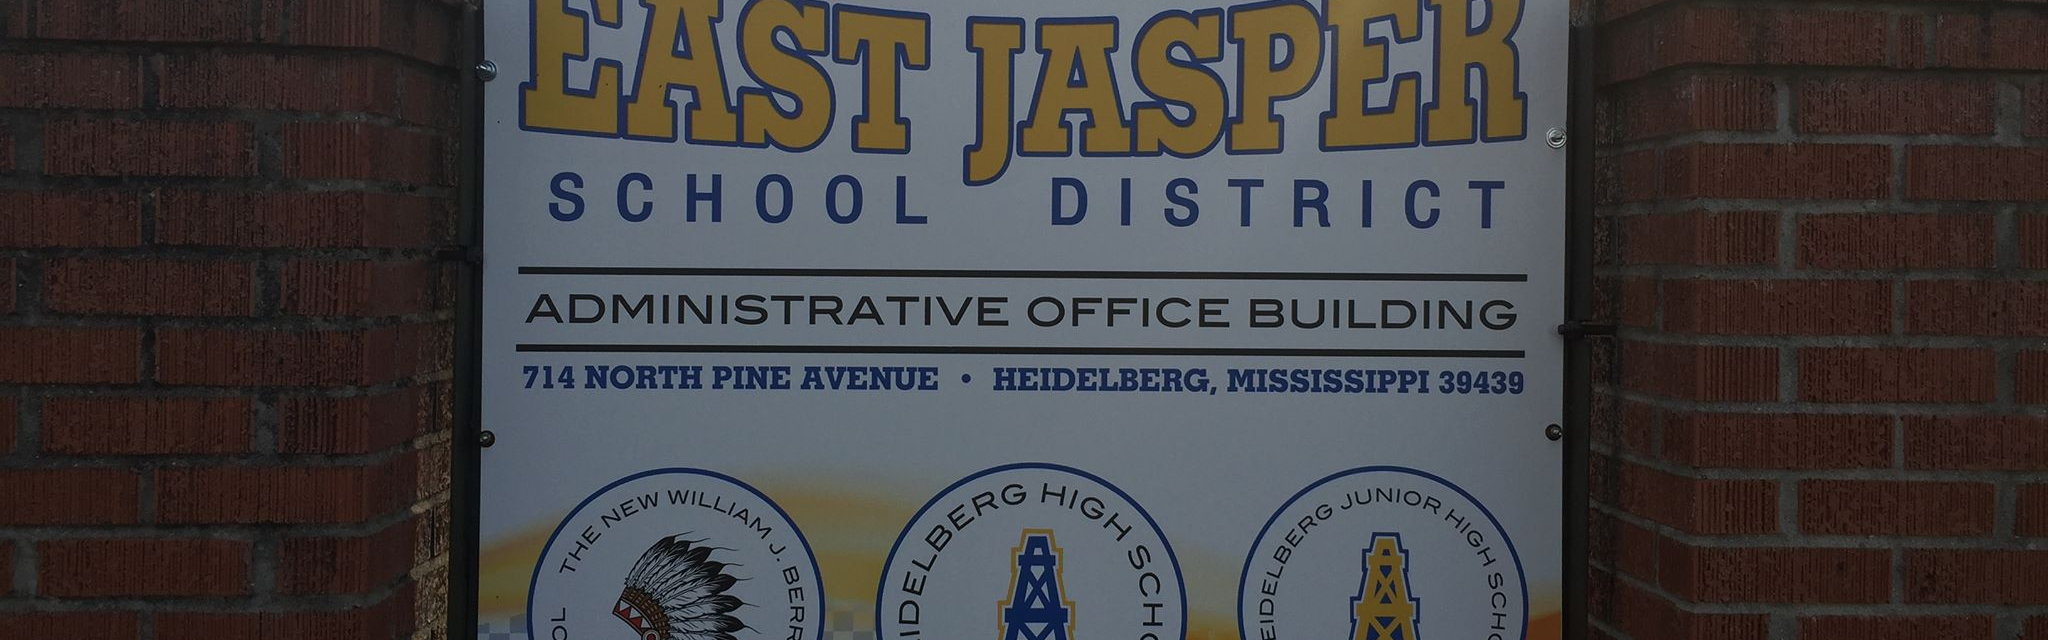 EAST JASPER CONSOLIDATED SCHOOL DISTRICT